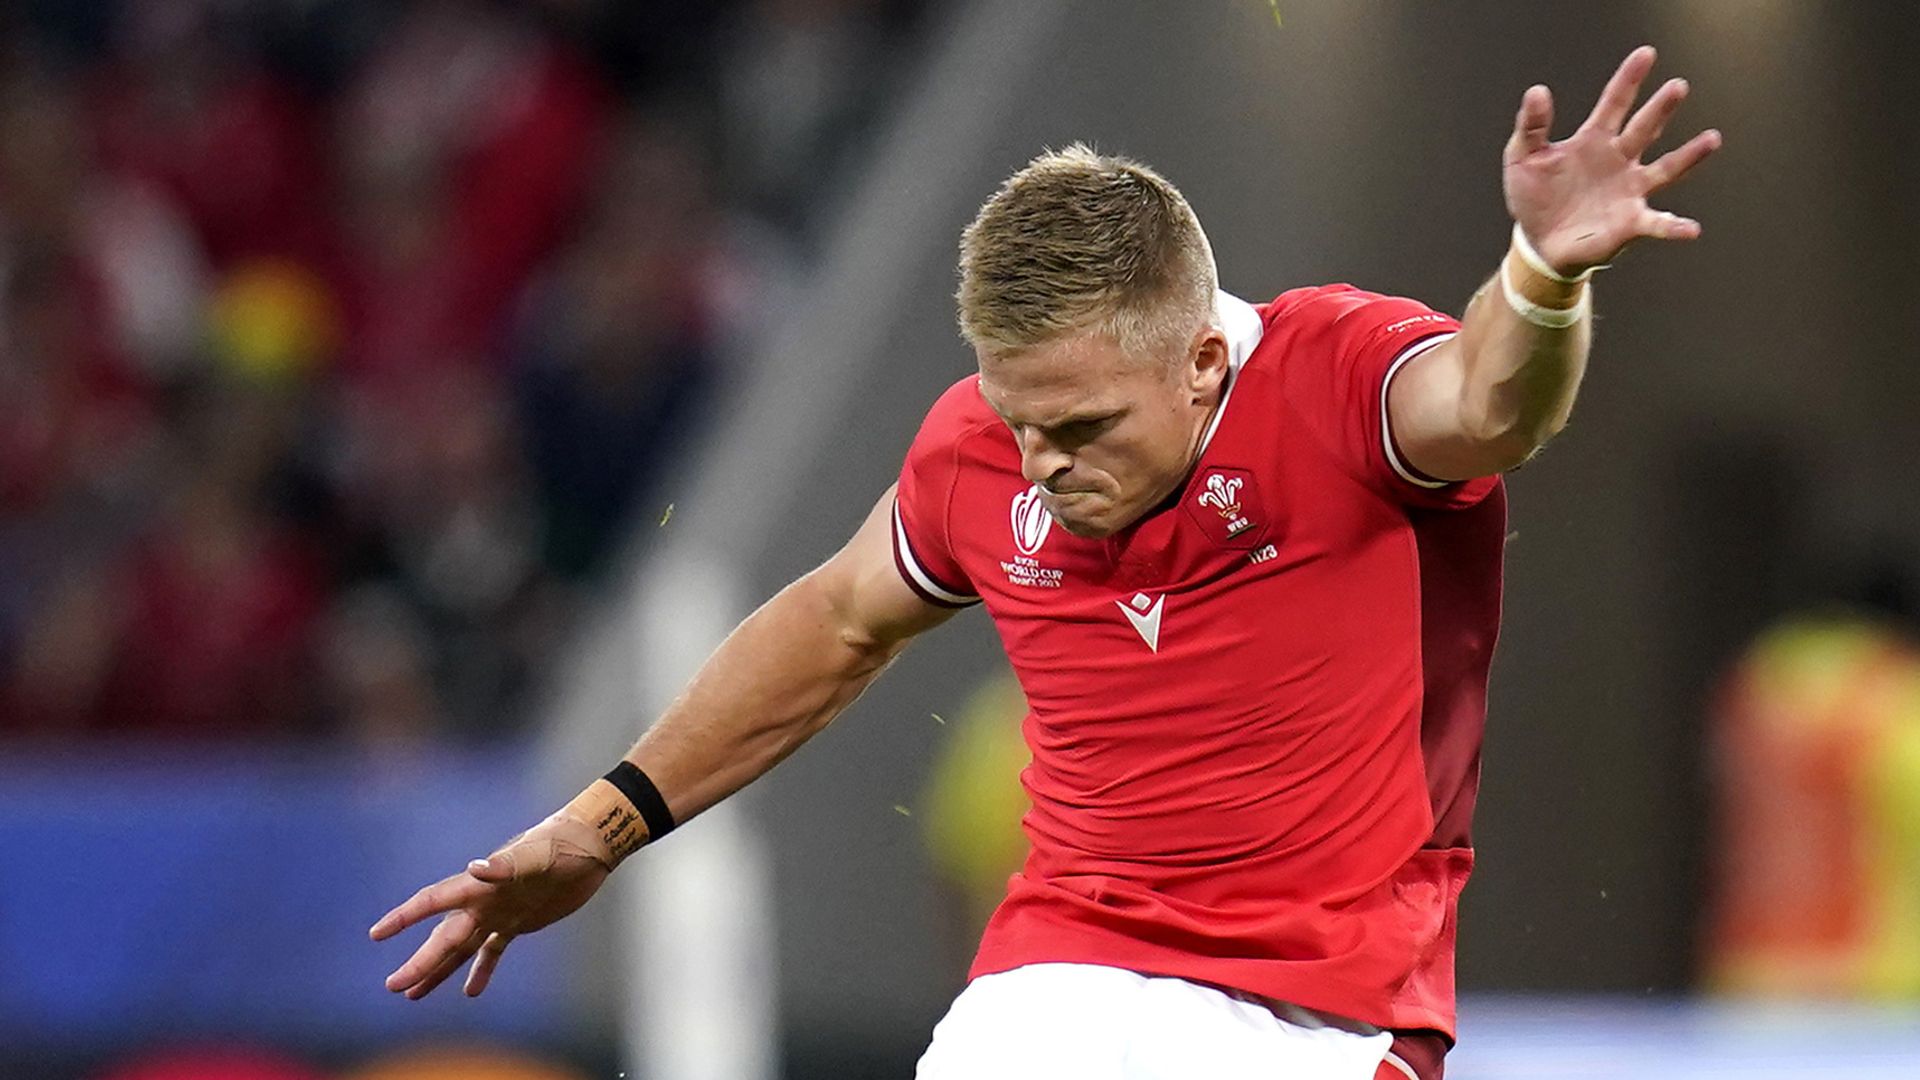 Anscombe replaces Biggar as Wales name strong side to face Georgia